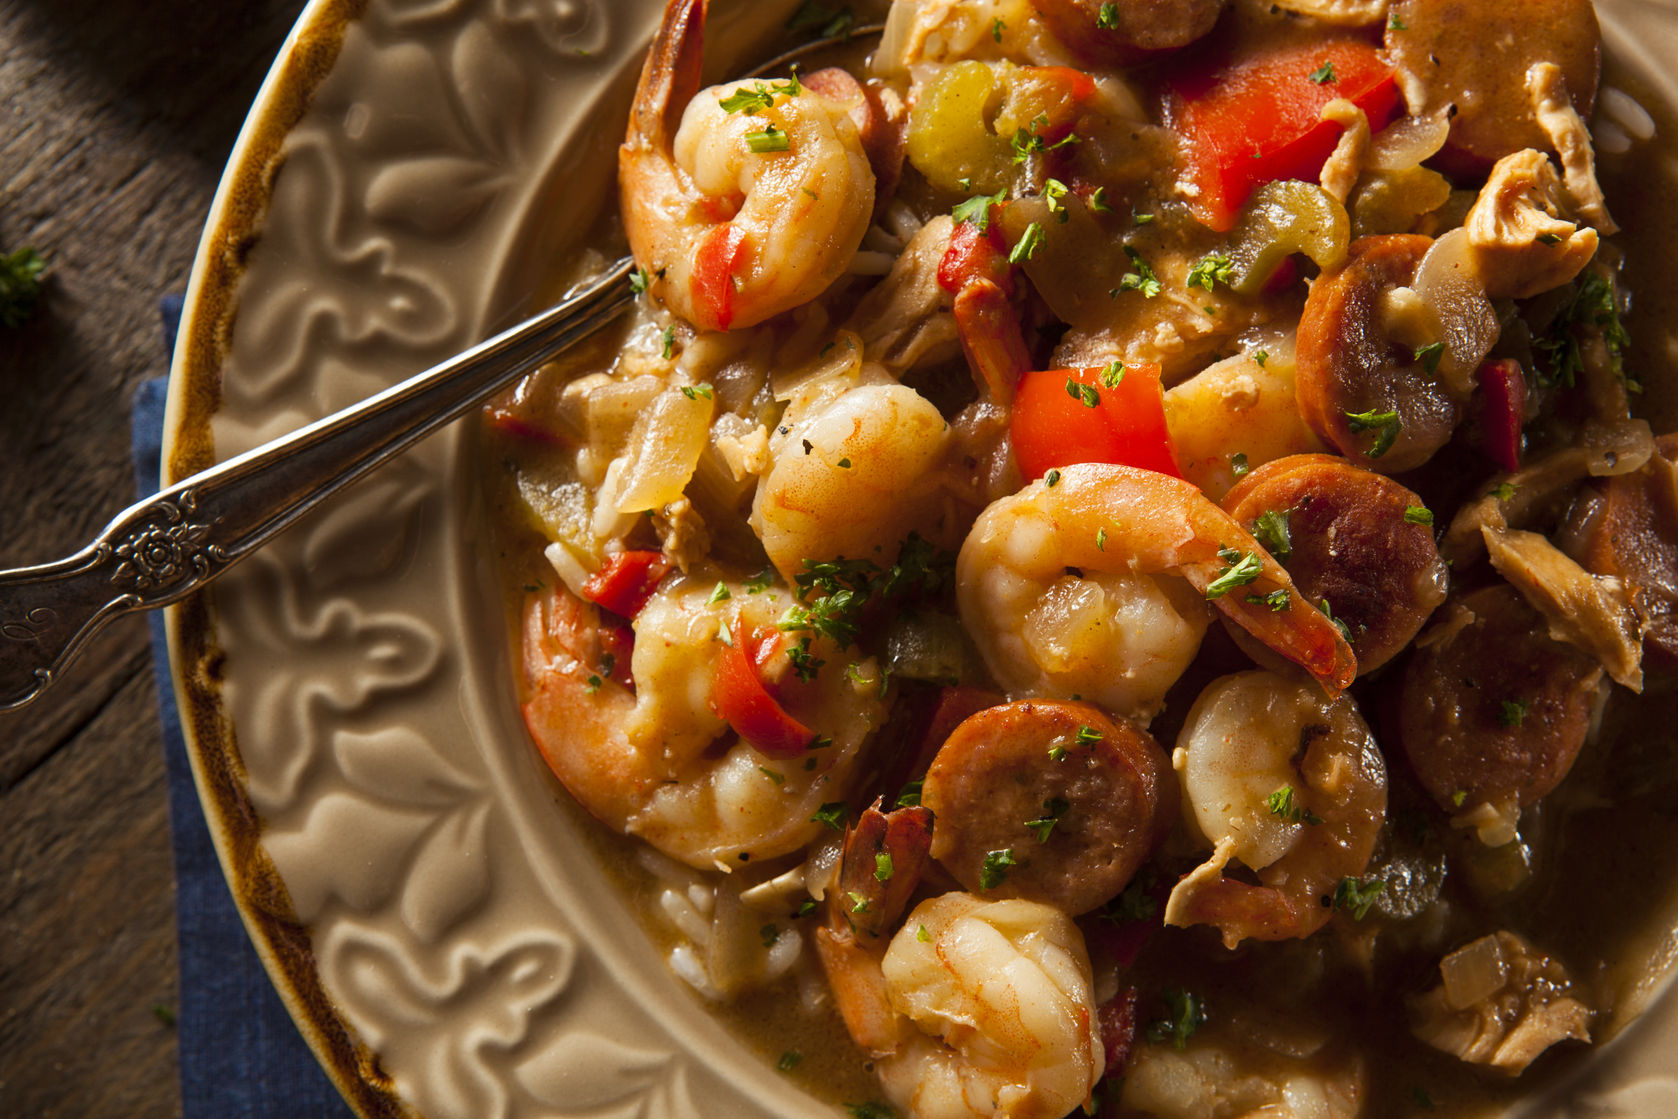 Pair MO Wine With Two Mardi Gras Classic Dishes